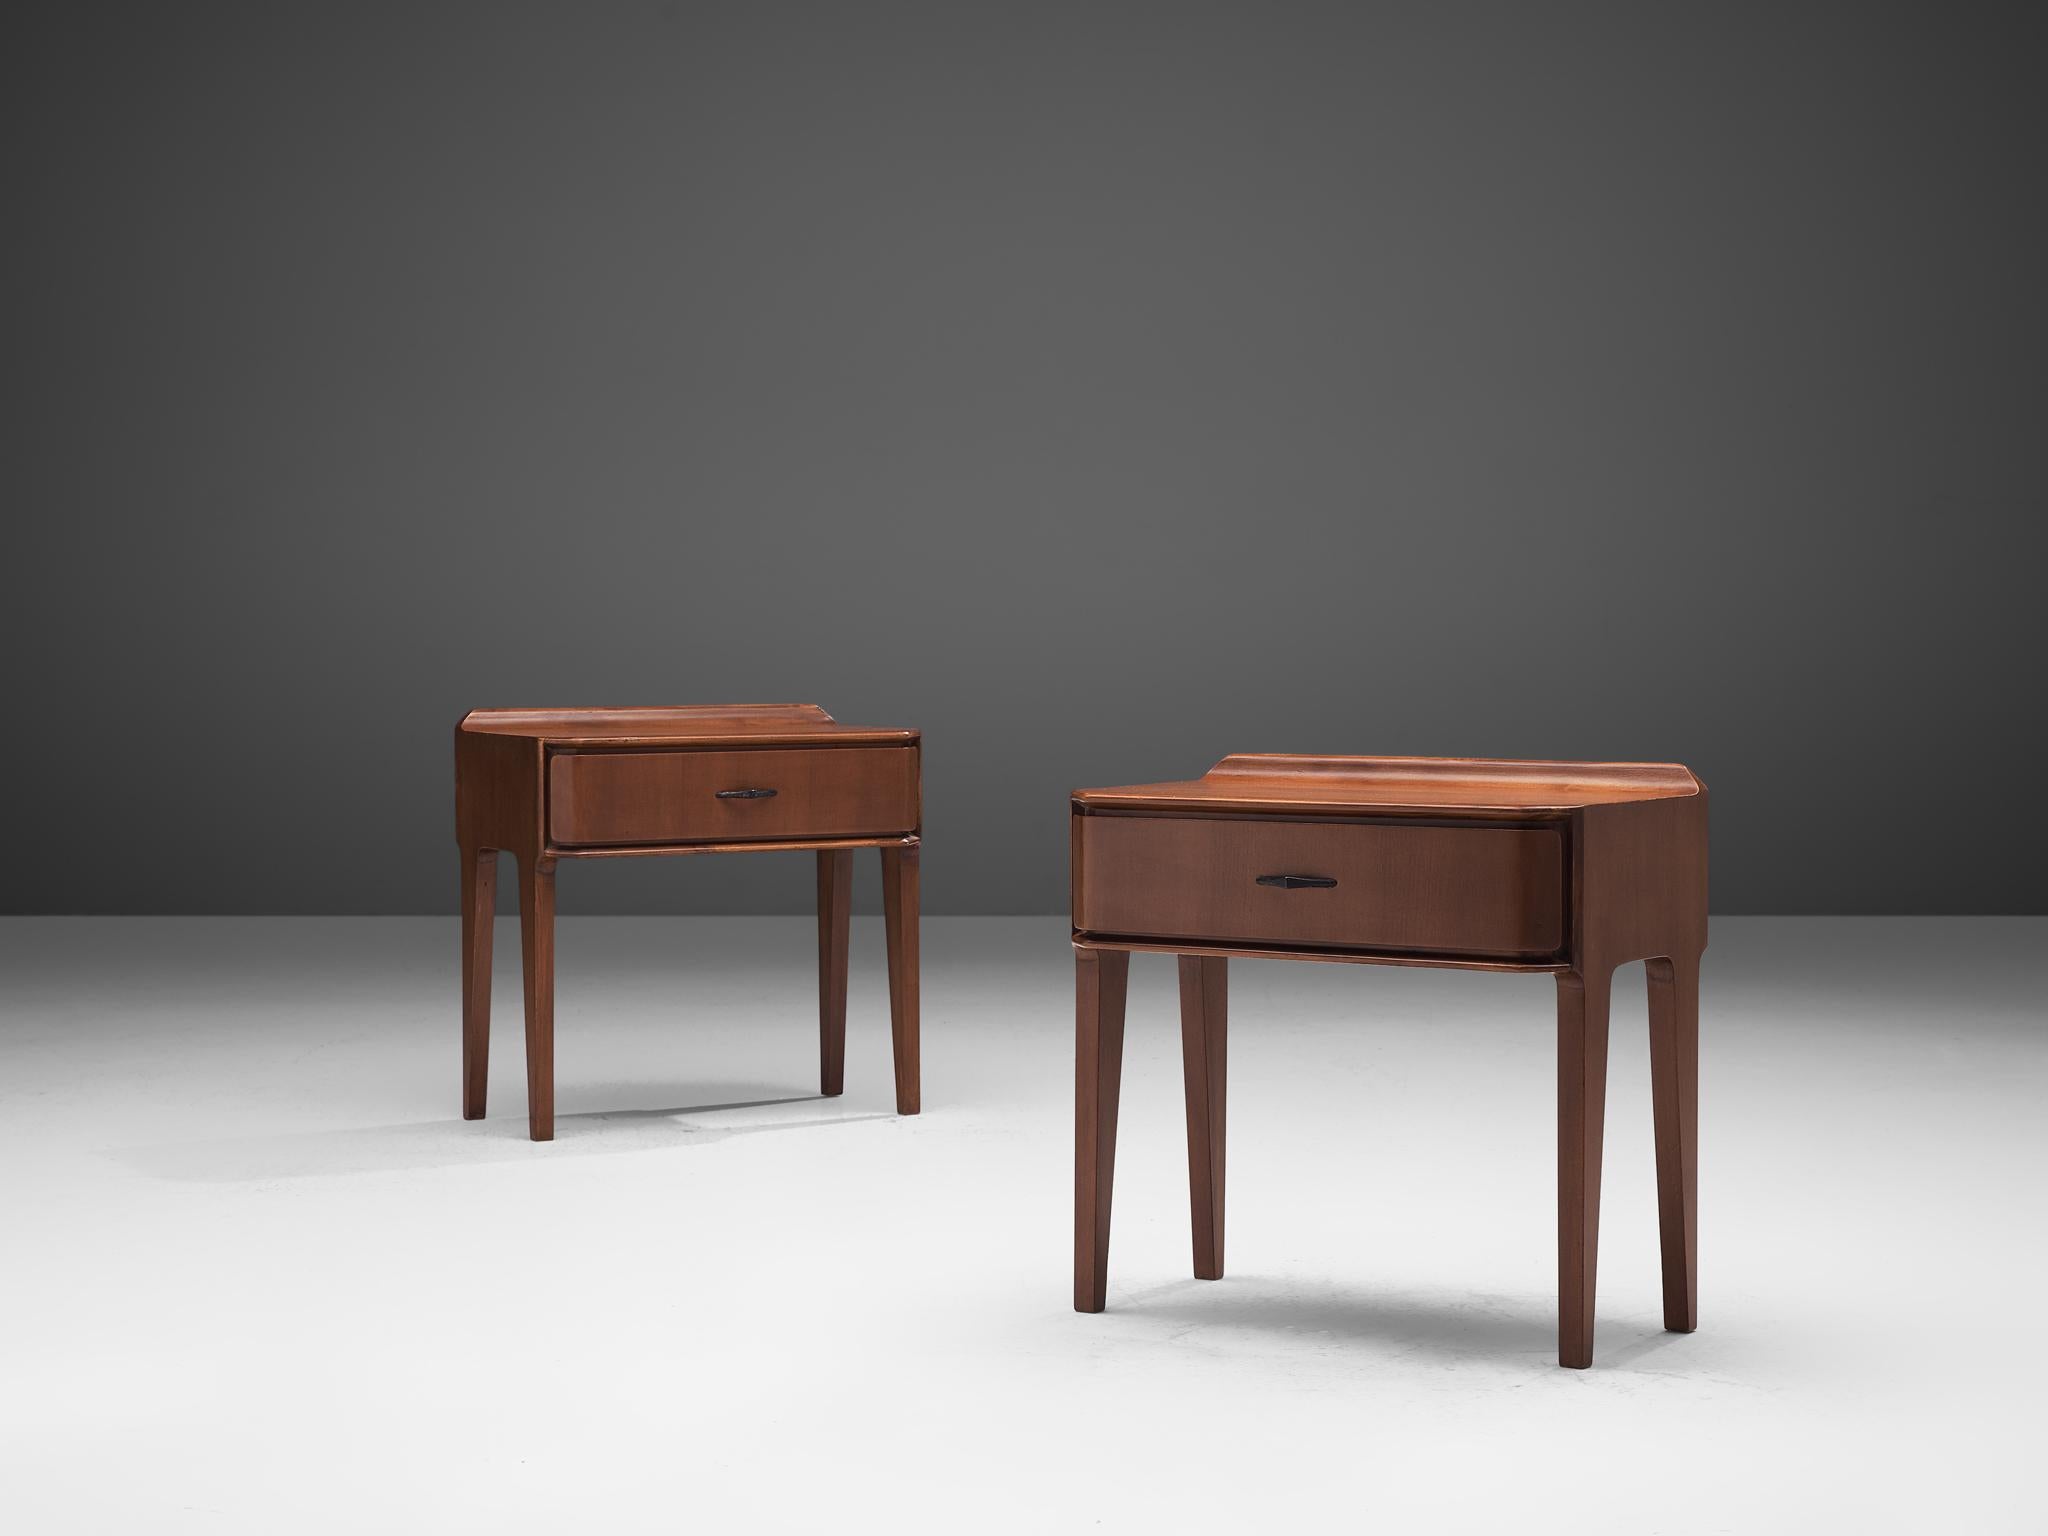 Pair of nightstands, walnut, Italy, 1960s

These two side tables or nightstands are both refined and simplistic. Each piece is equipped with a drawer for storage. The top is rectangular shaped with beveled corners, that run through the drawers as